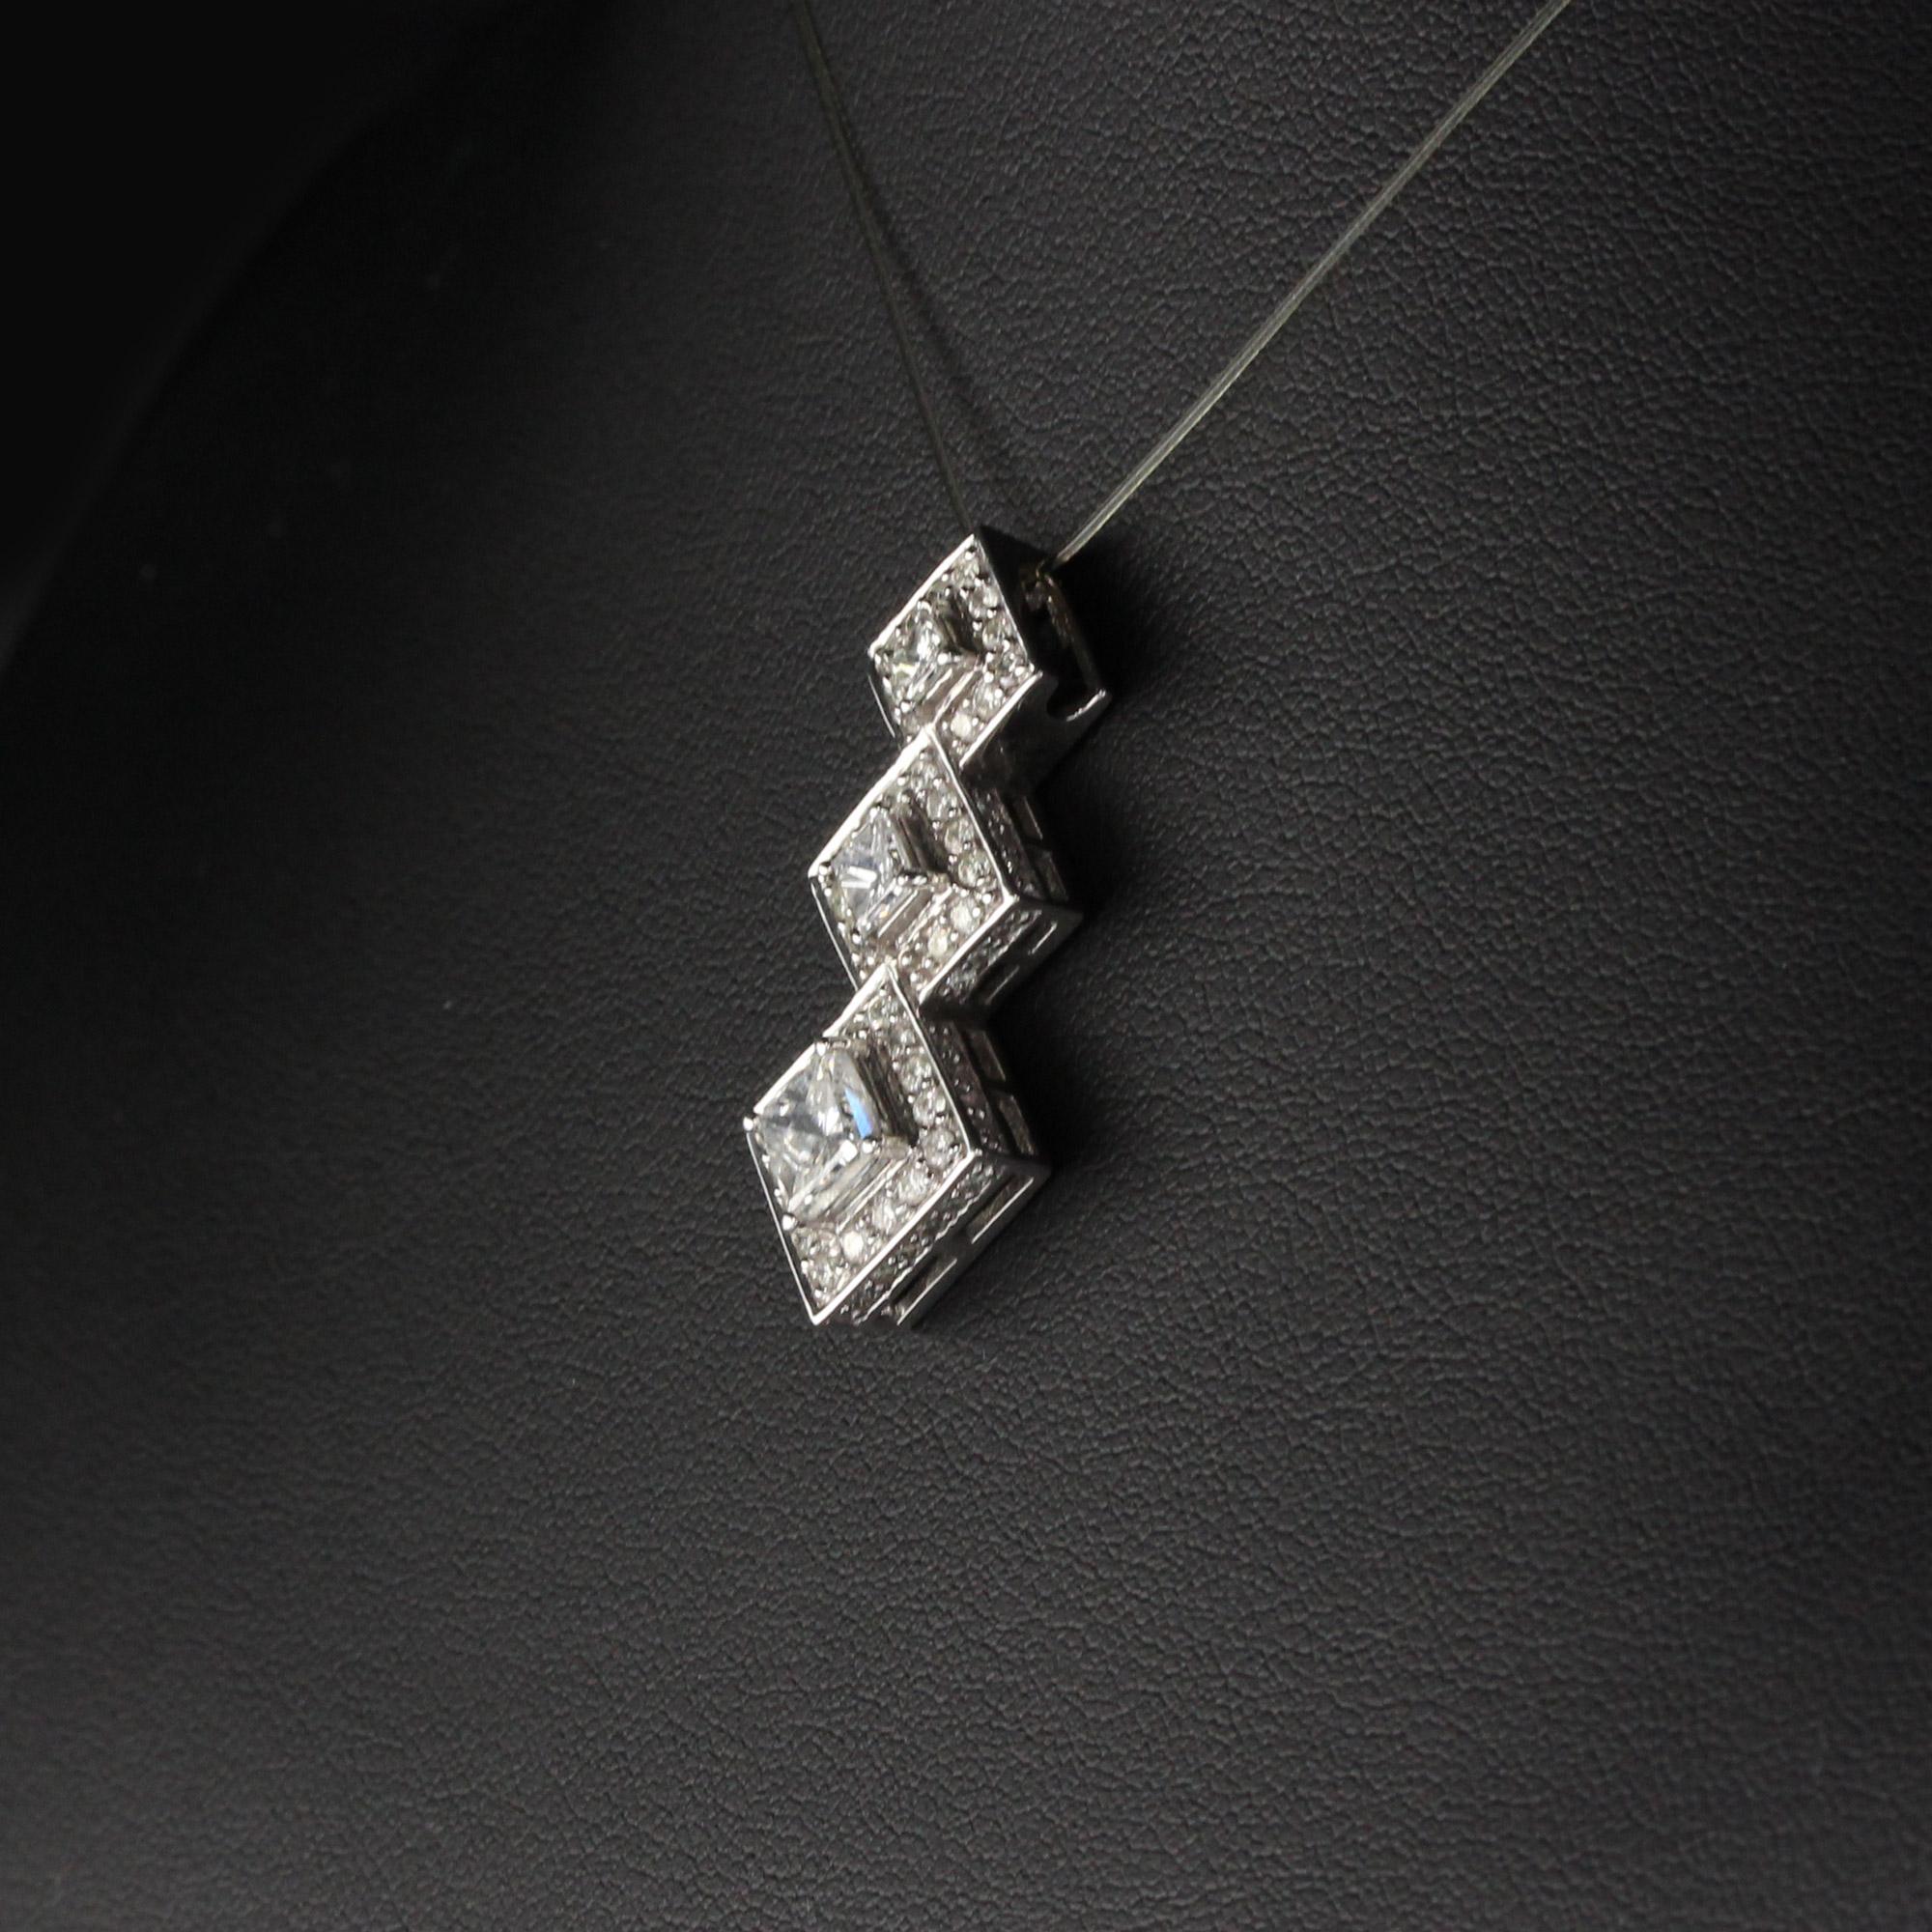 Vintage Estate 14 Karat White Gold Diamond Pendant In Excellent Condition For Sale In Great Neck, NY